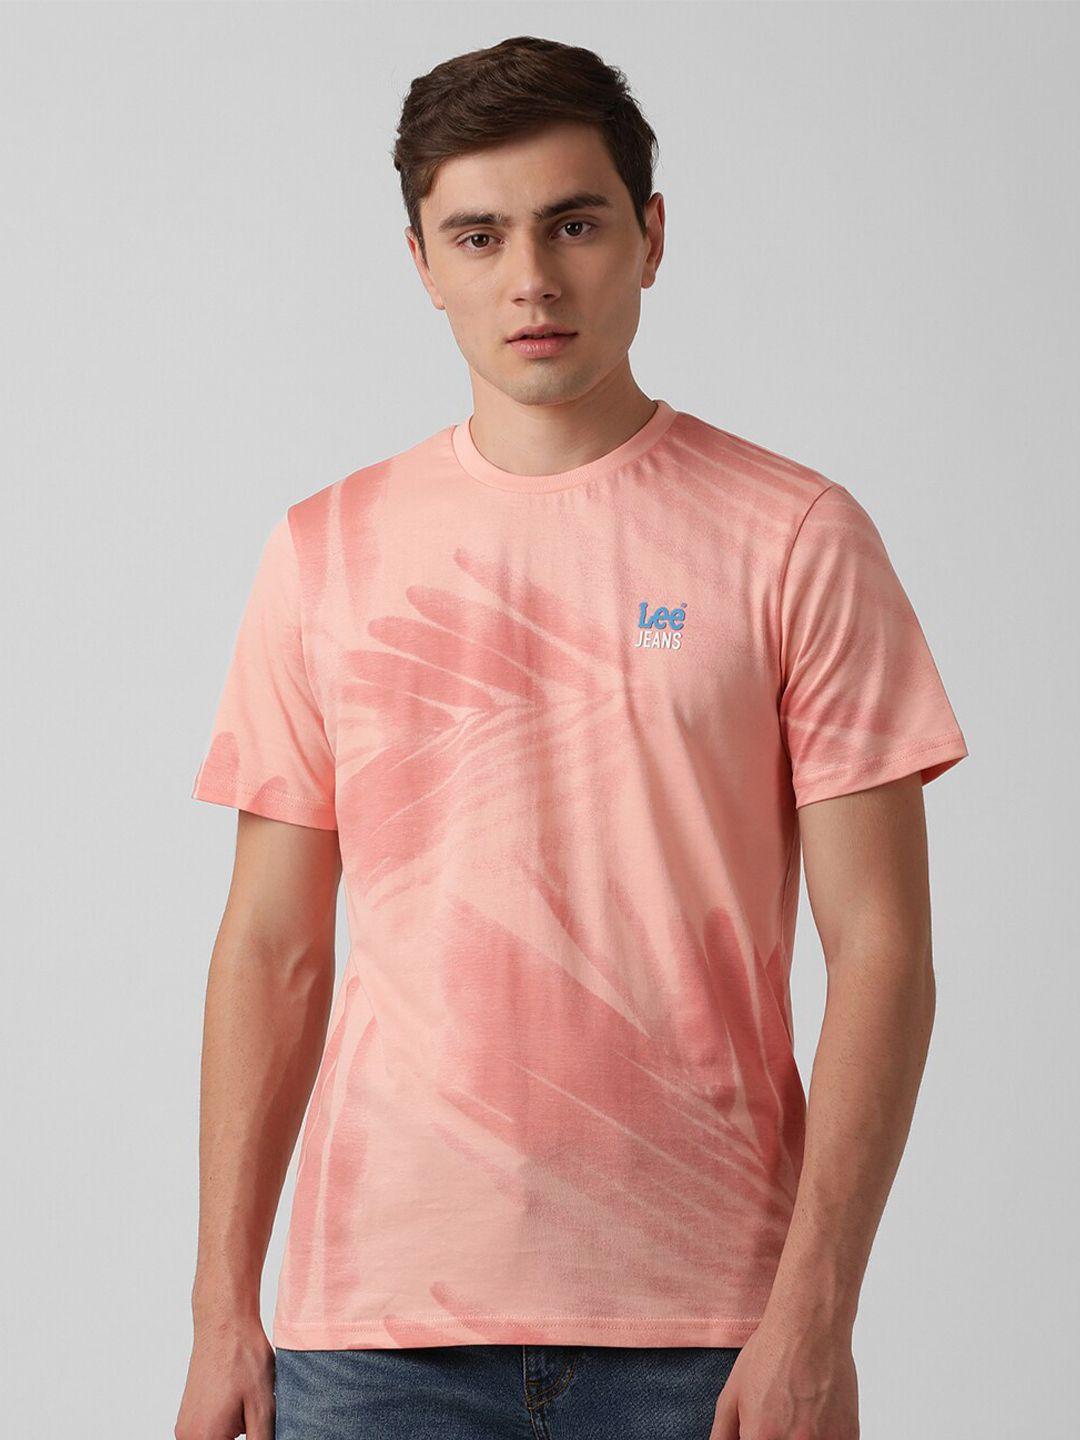 lee abstract printed cotton t-shirt